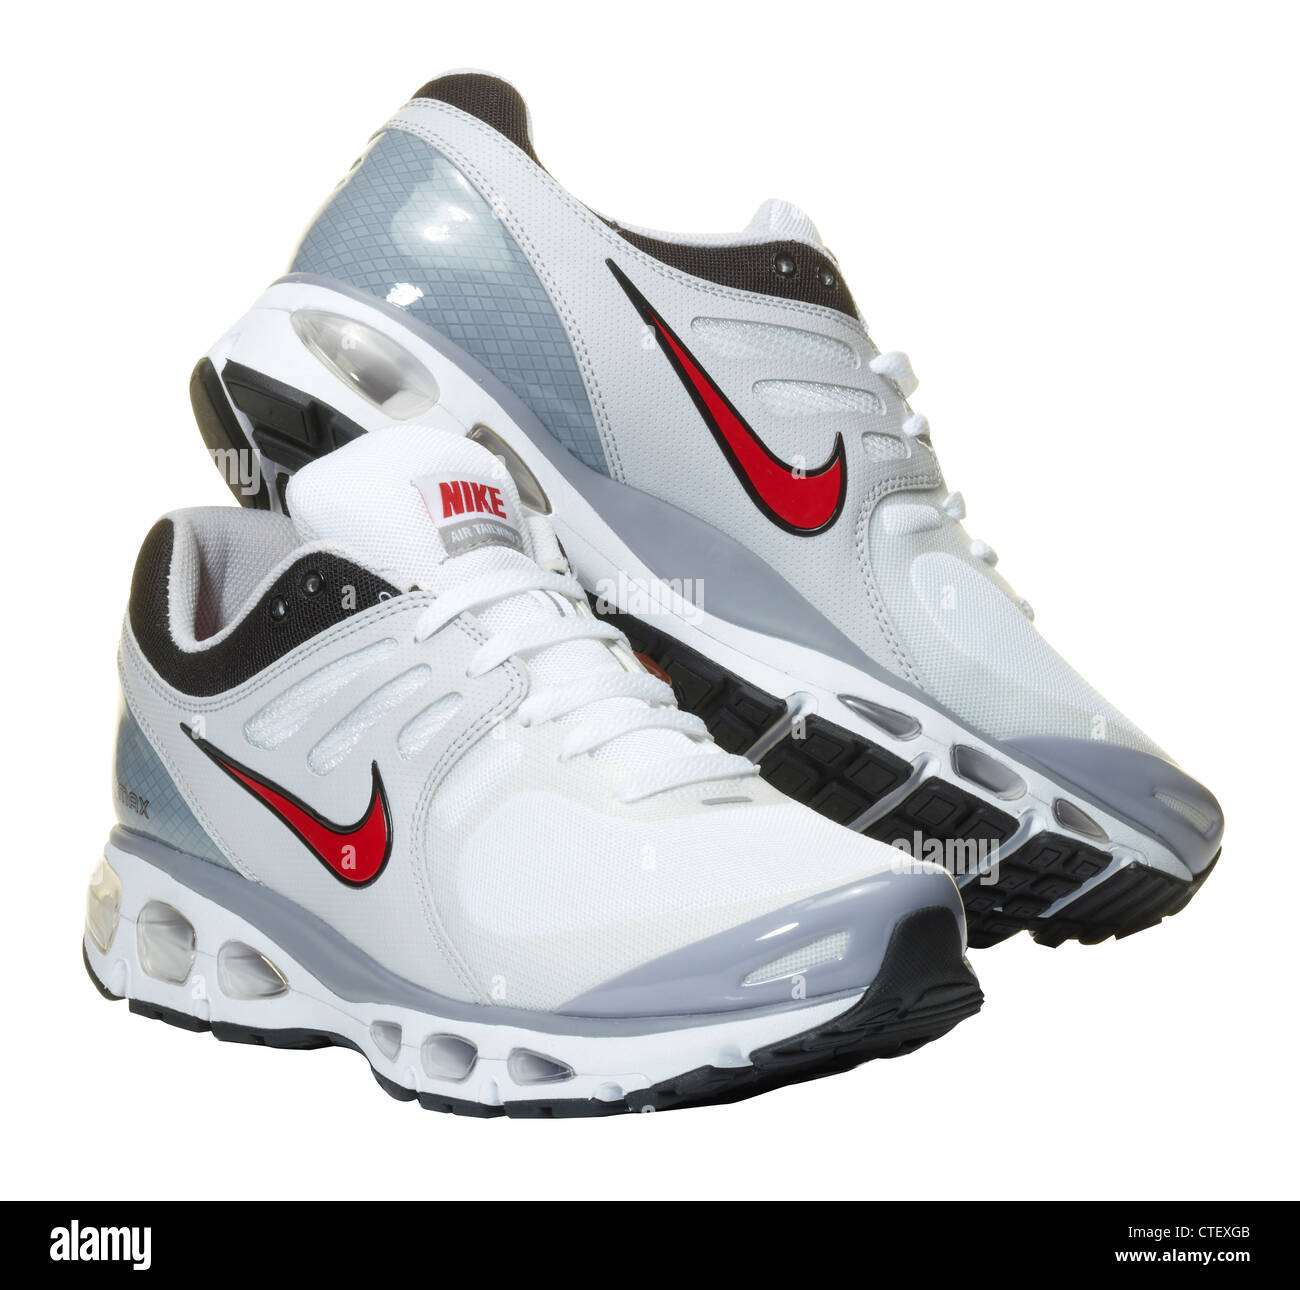 Nike Air Max training shoes Stock Photo